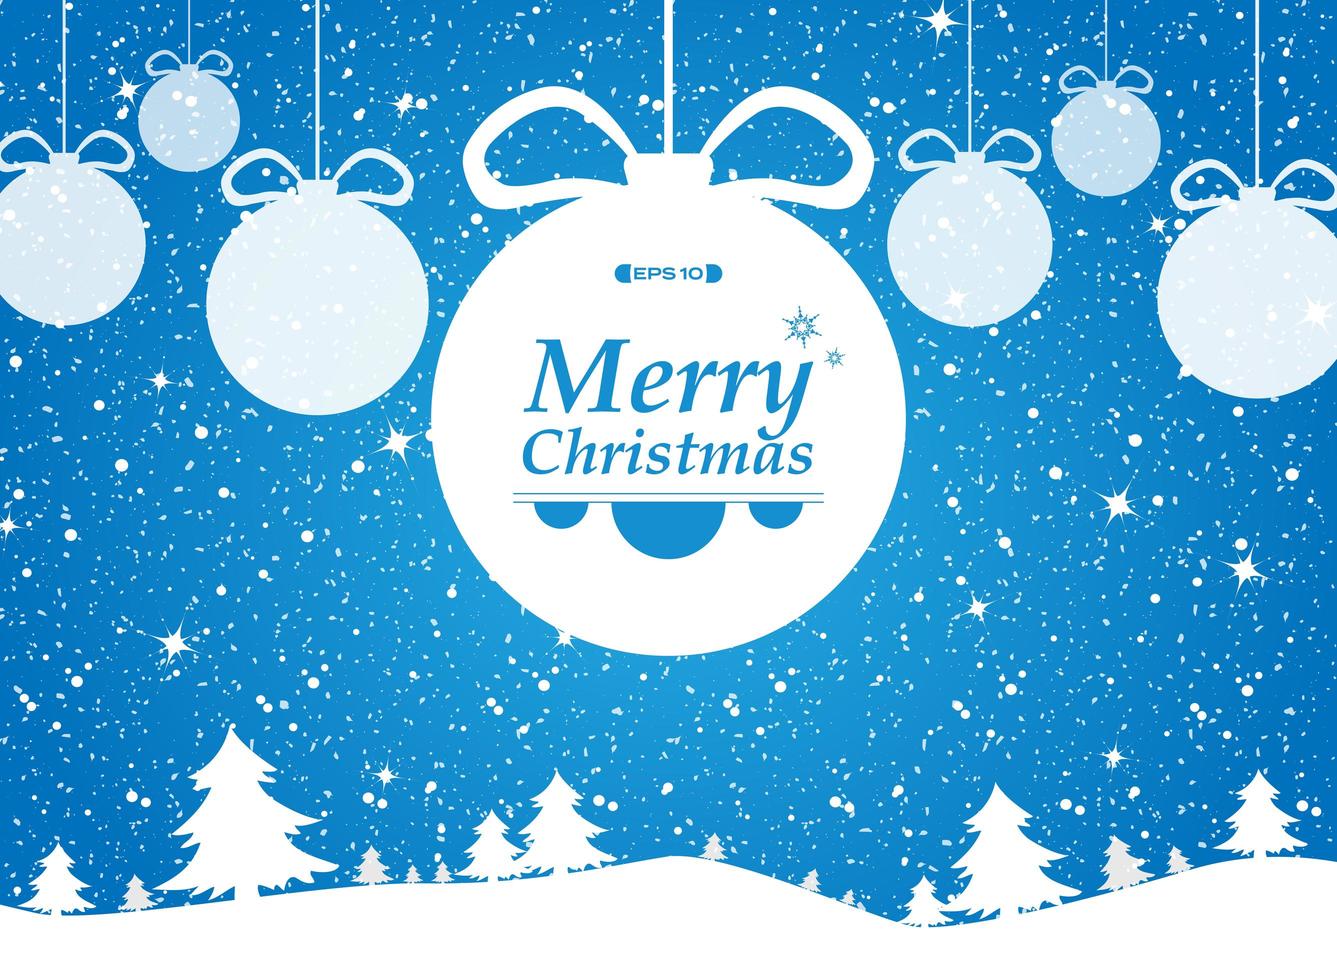 Merry Christmas blue background in forest and snows gifts. vector